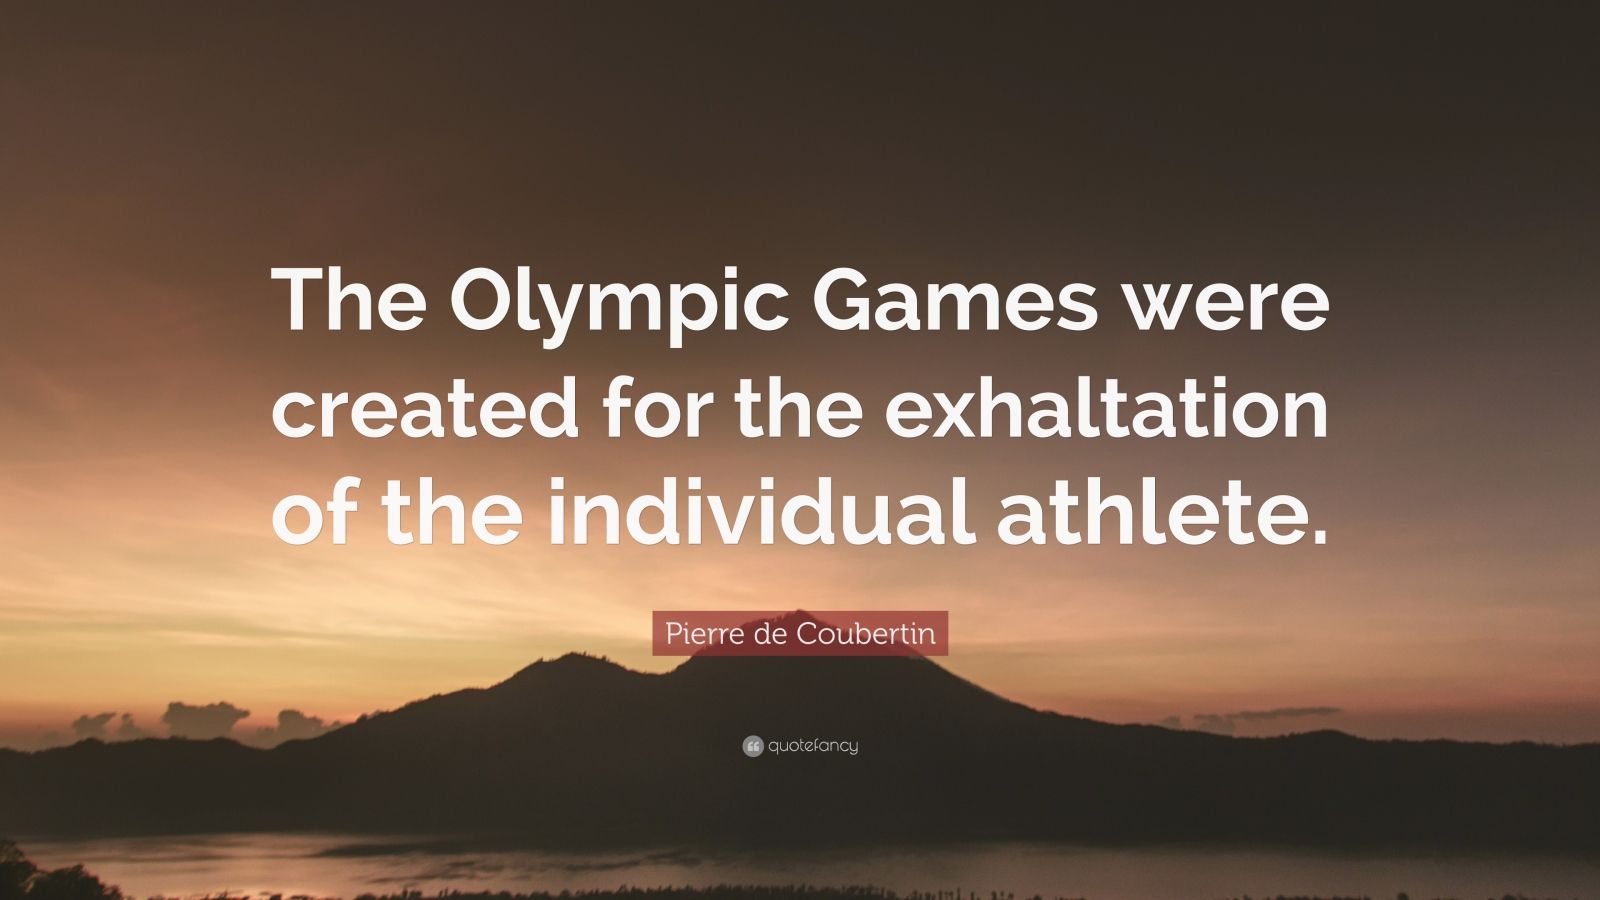 Pierre de Coubertin Quote: “The Olympic Games were created for the